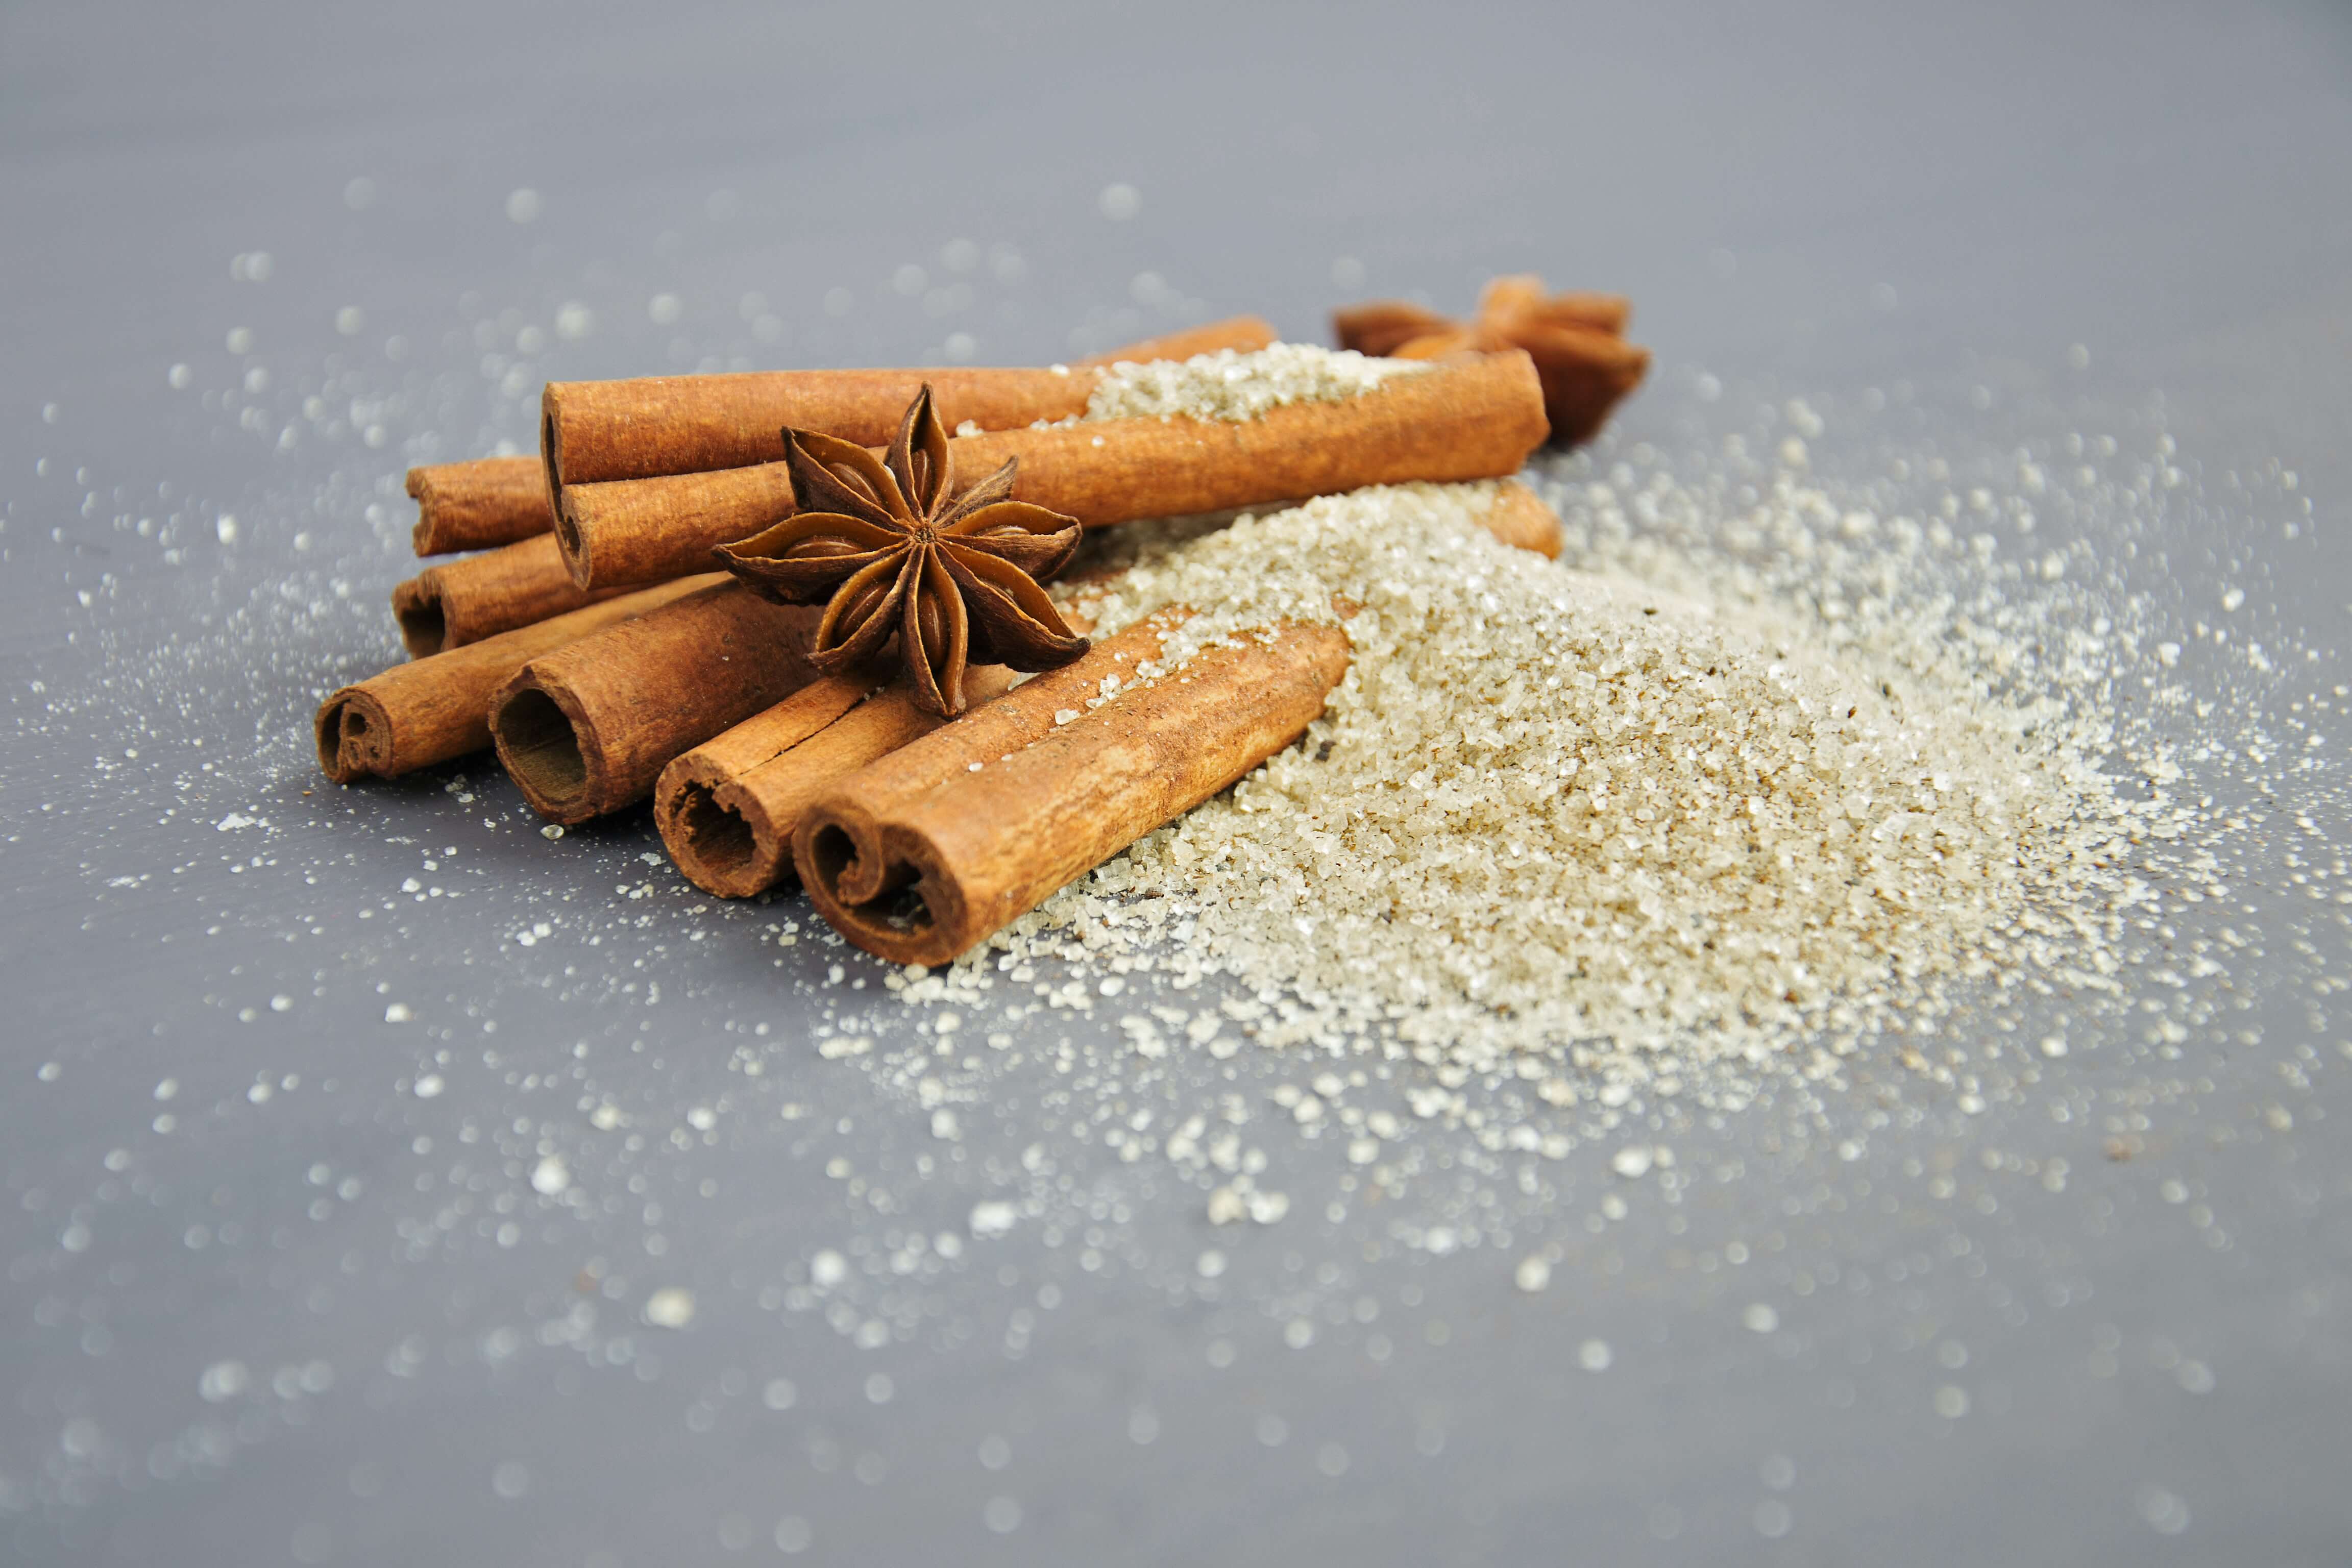 An image of cinnamon and star anise to represent the top 10 winter herbs, seasoning and spices